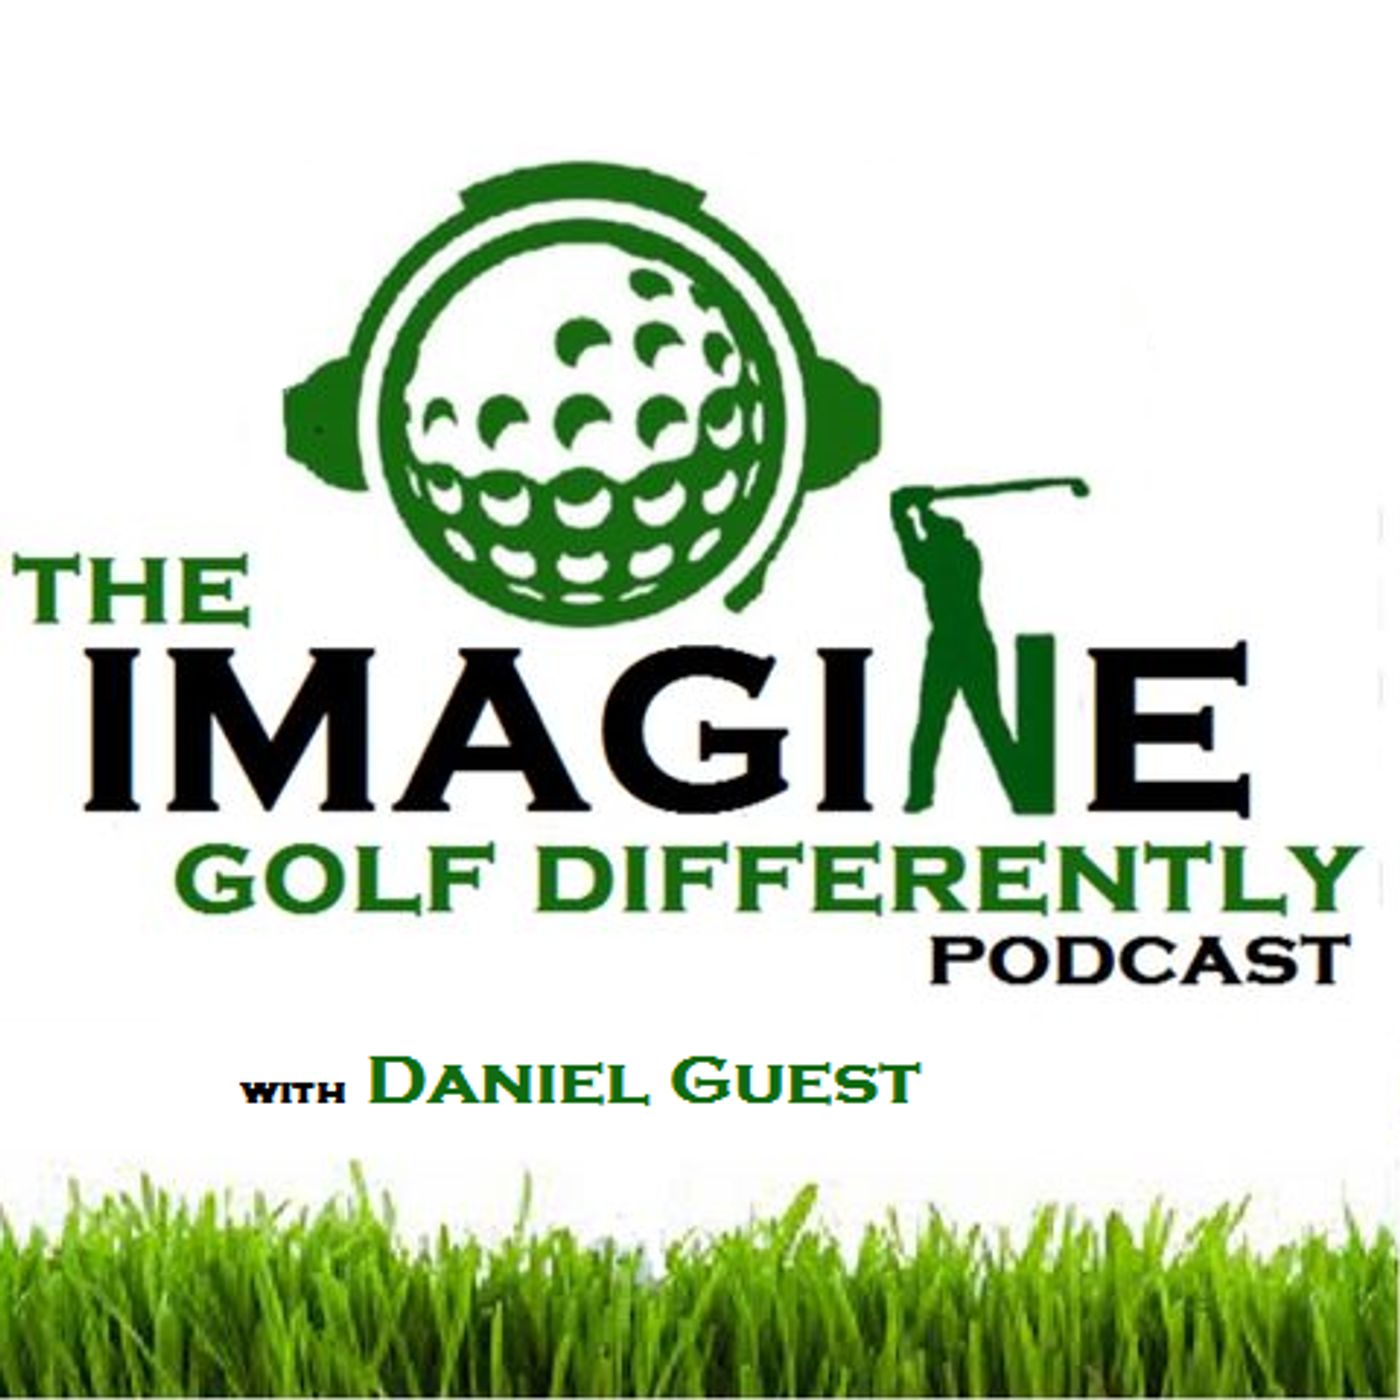 The IMAGINE Golf Differently Podcast artwork